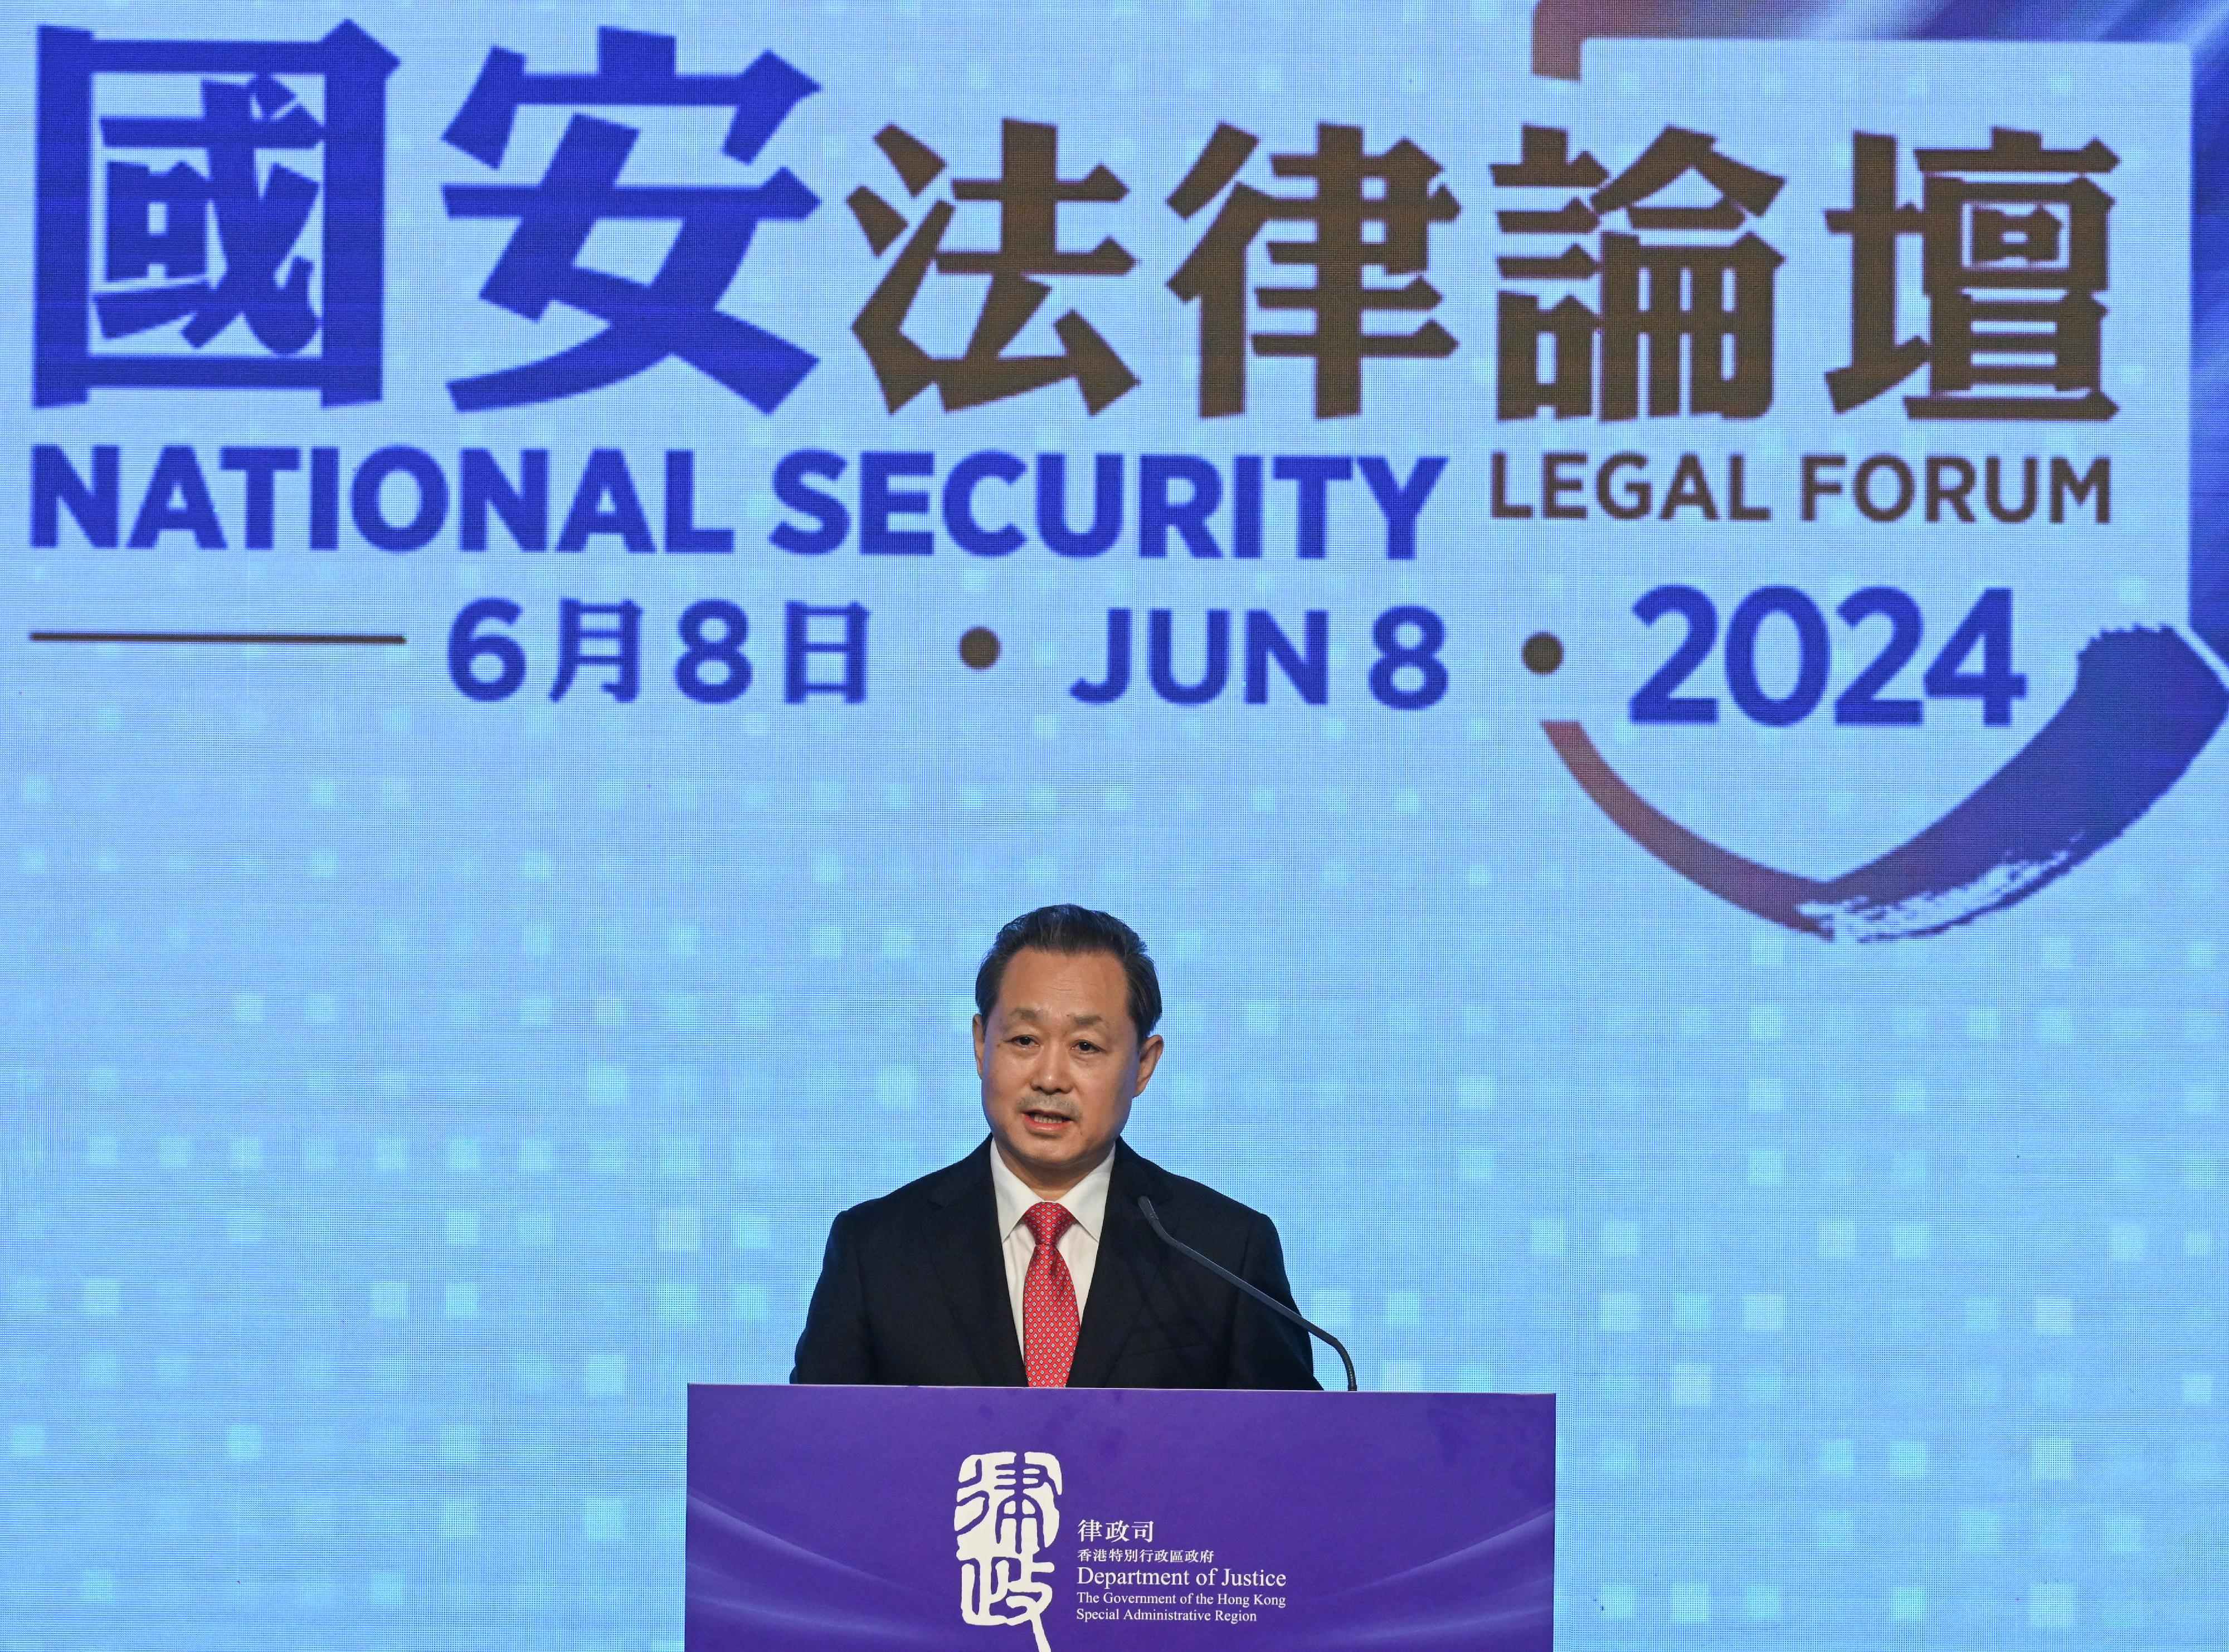 The Department of Justice today (June 8) held the National Security Legal Forum with the theme of "Looking Back and Ahead, New Dawn for Development". Photo shows the Head of the Office for Safeguarding National Security of the Central People's Government in the Hong Kong Special Administrative Region, Mr Dong Jingwei, delivering his opening remarks at the forum.